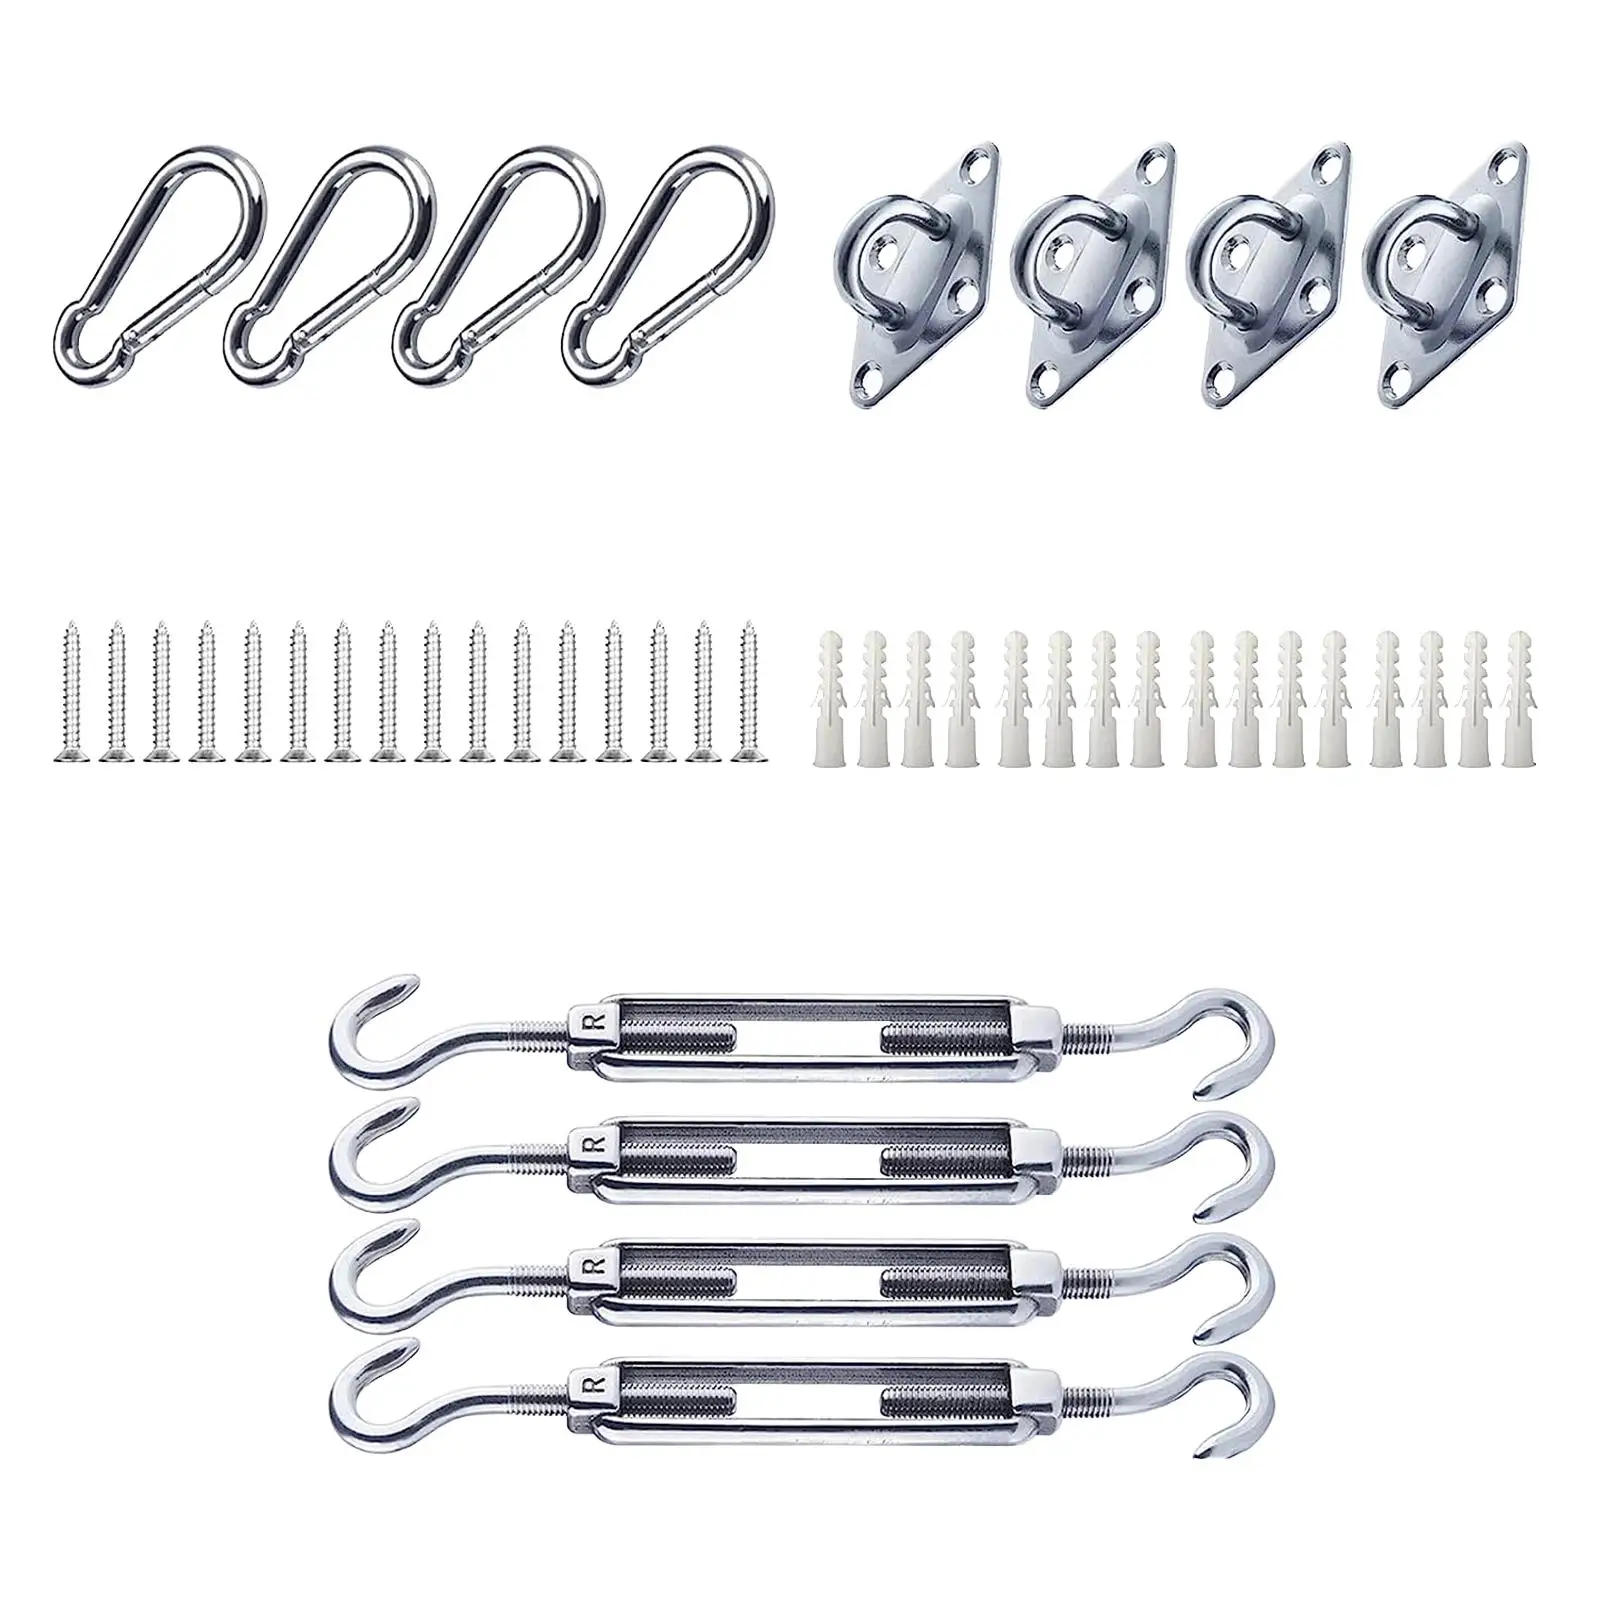 Canopy Installation Kits Stainless Steel Metal Sail Shade Hardware Kits Awning Attachment Set for Deck Lawn Patio